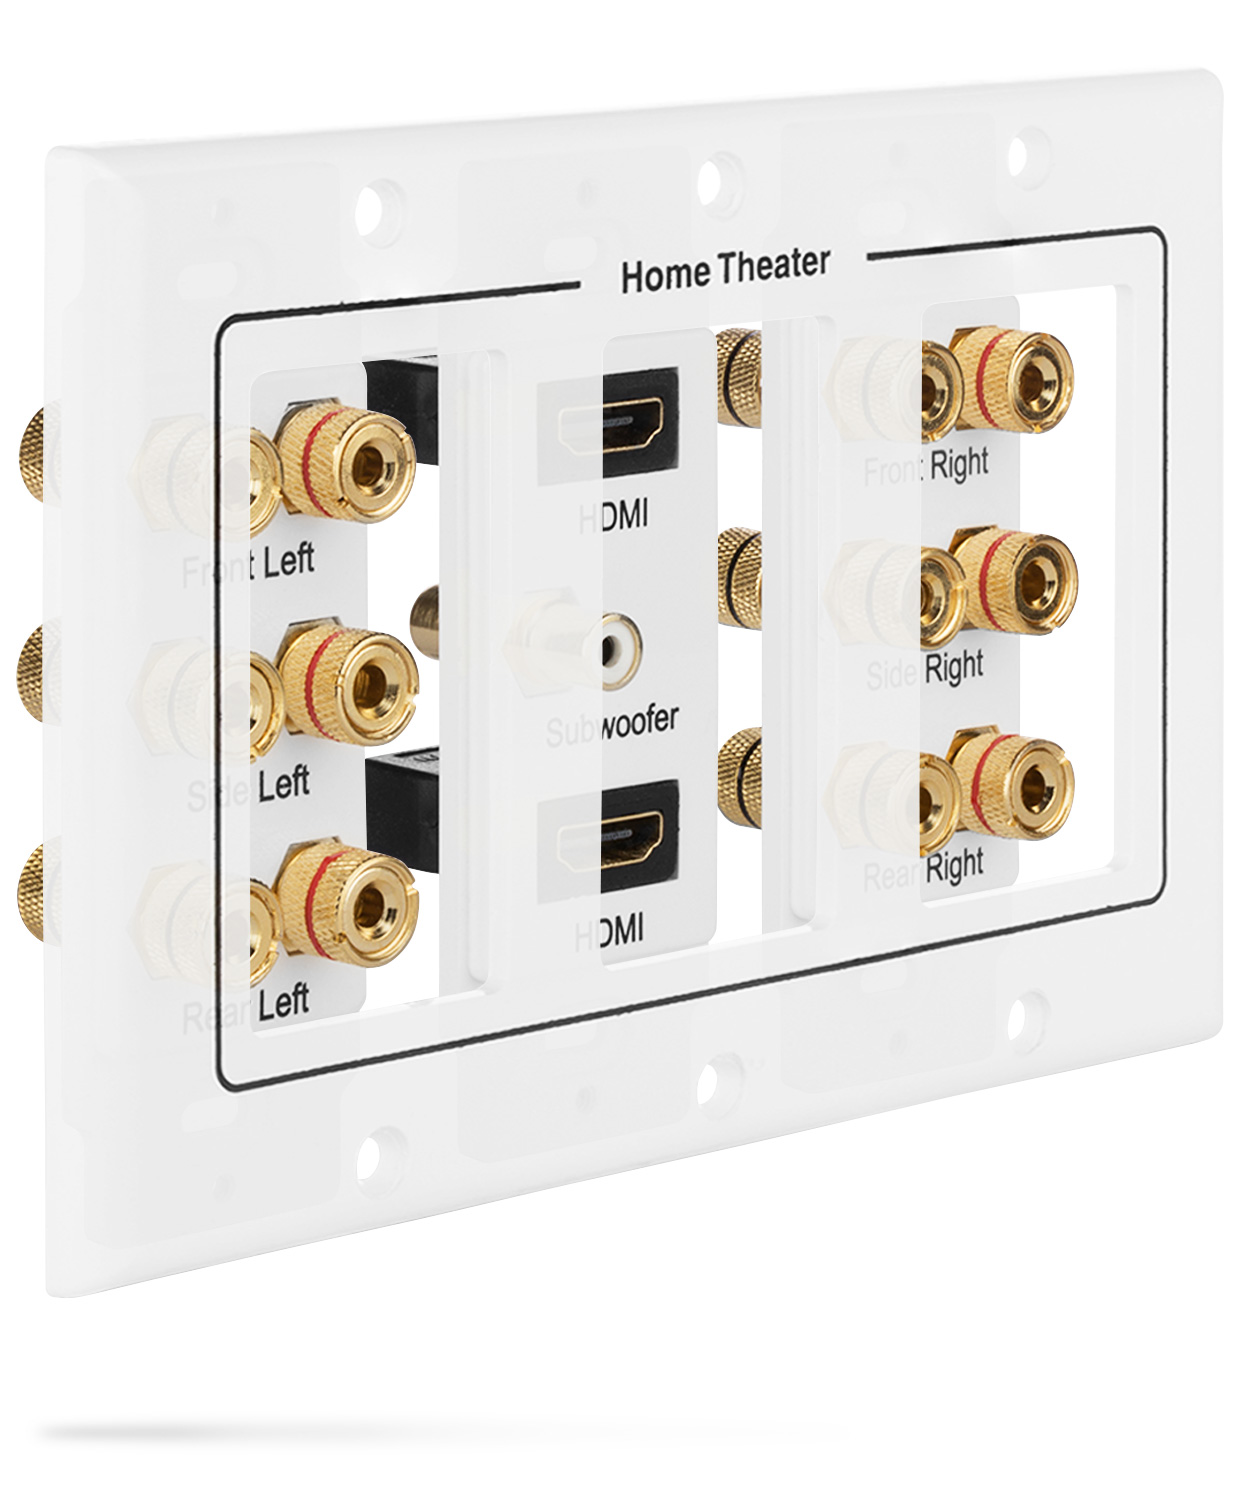 Fosmon HD8005 [3-Gang 6.1 Surround Distribution] Home Theater Copper Banana Binding Post Coupler Type Wall Plate for 6 Speakers, 1 RCA Jack for Subwoofer & 2 HDMI Ports - image 4 of 7